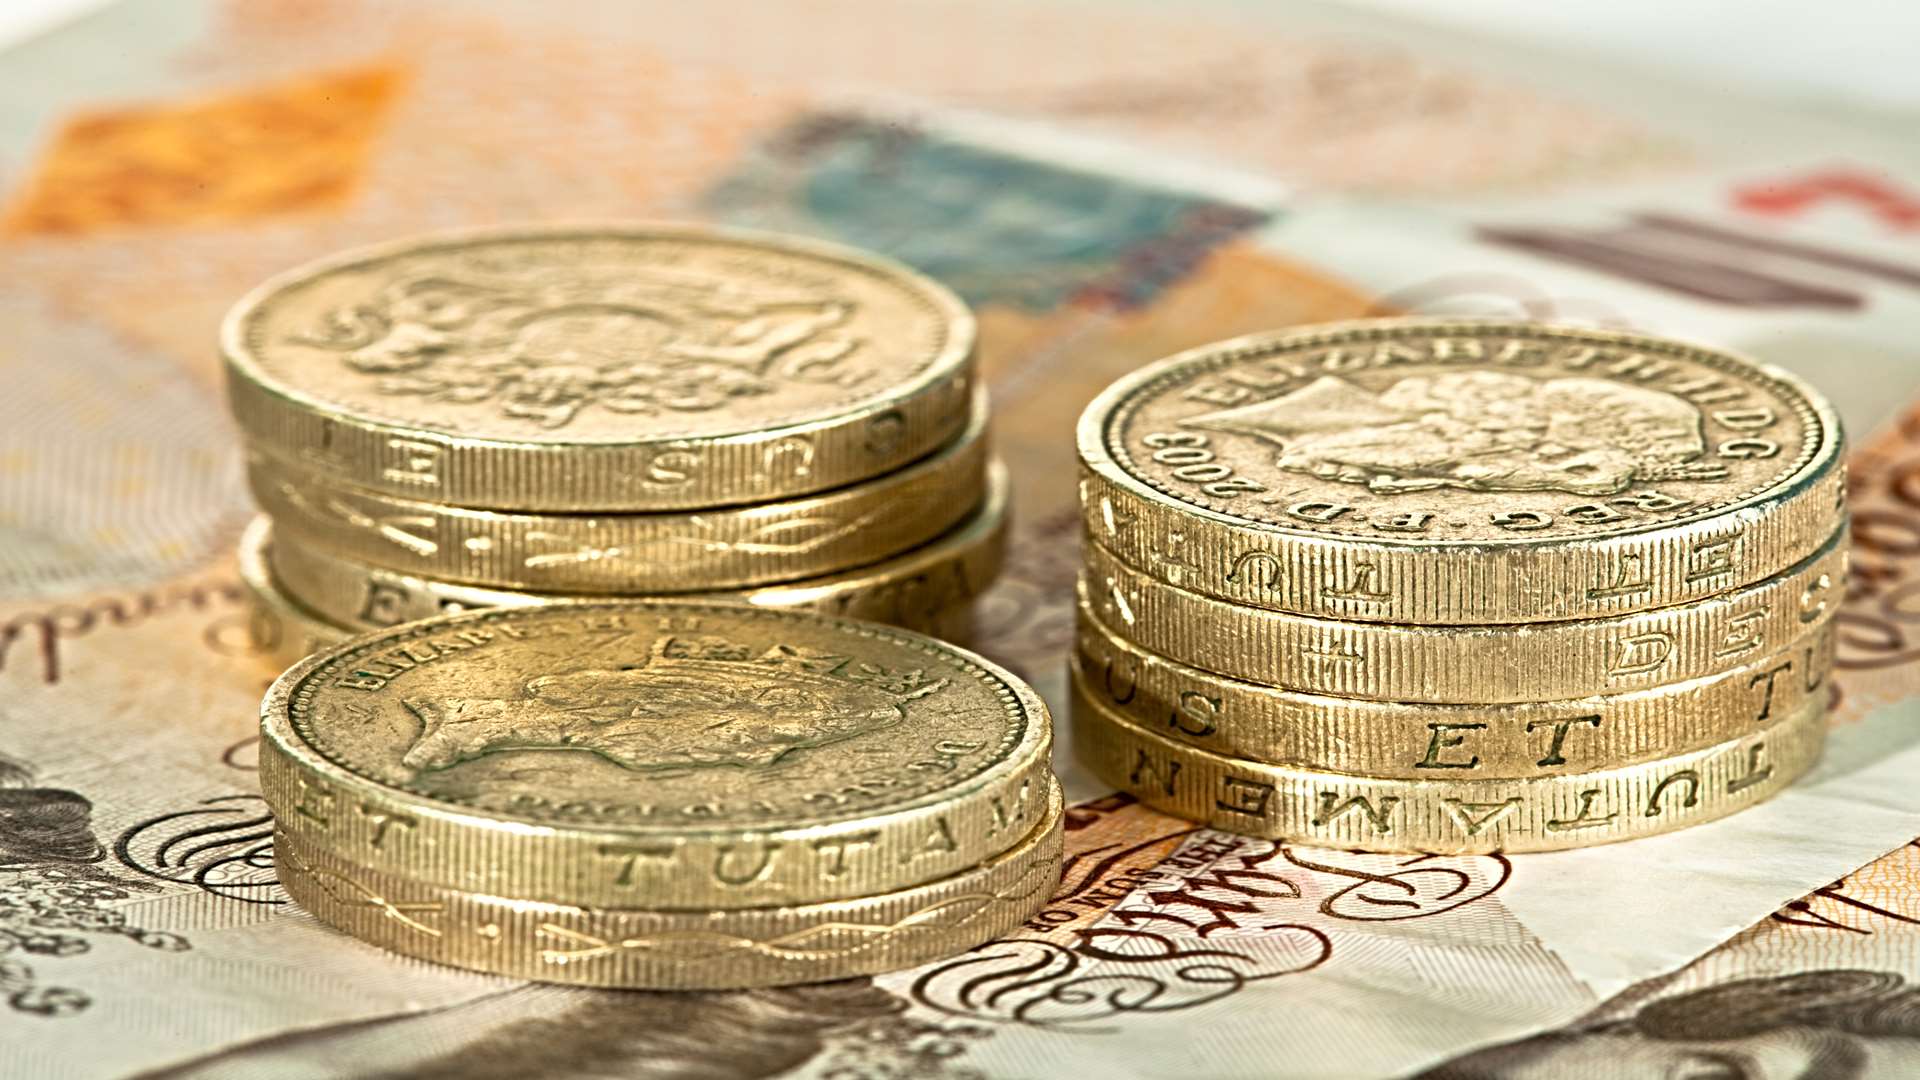 Businesses in Kent can apply for a loan from a £200 million fund set up for the county by HSBC